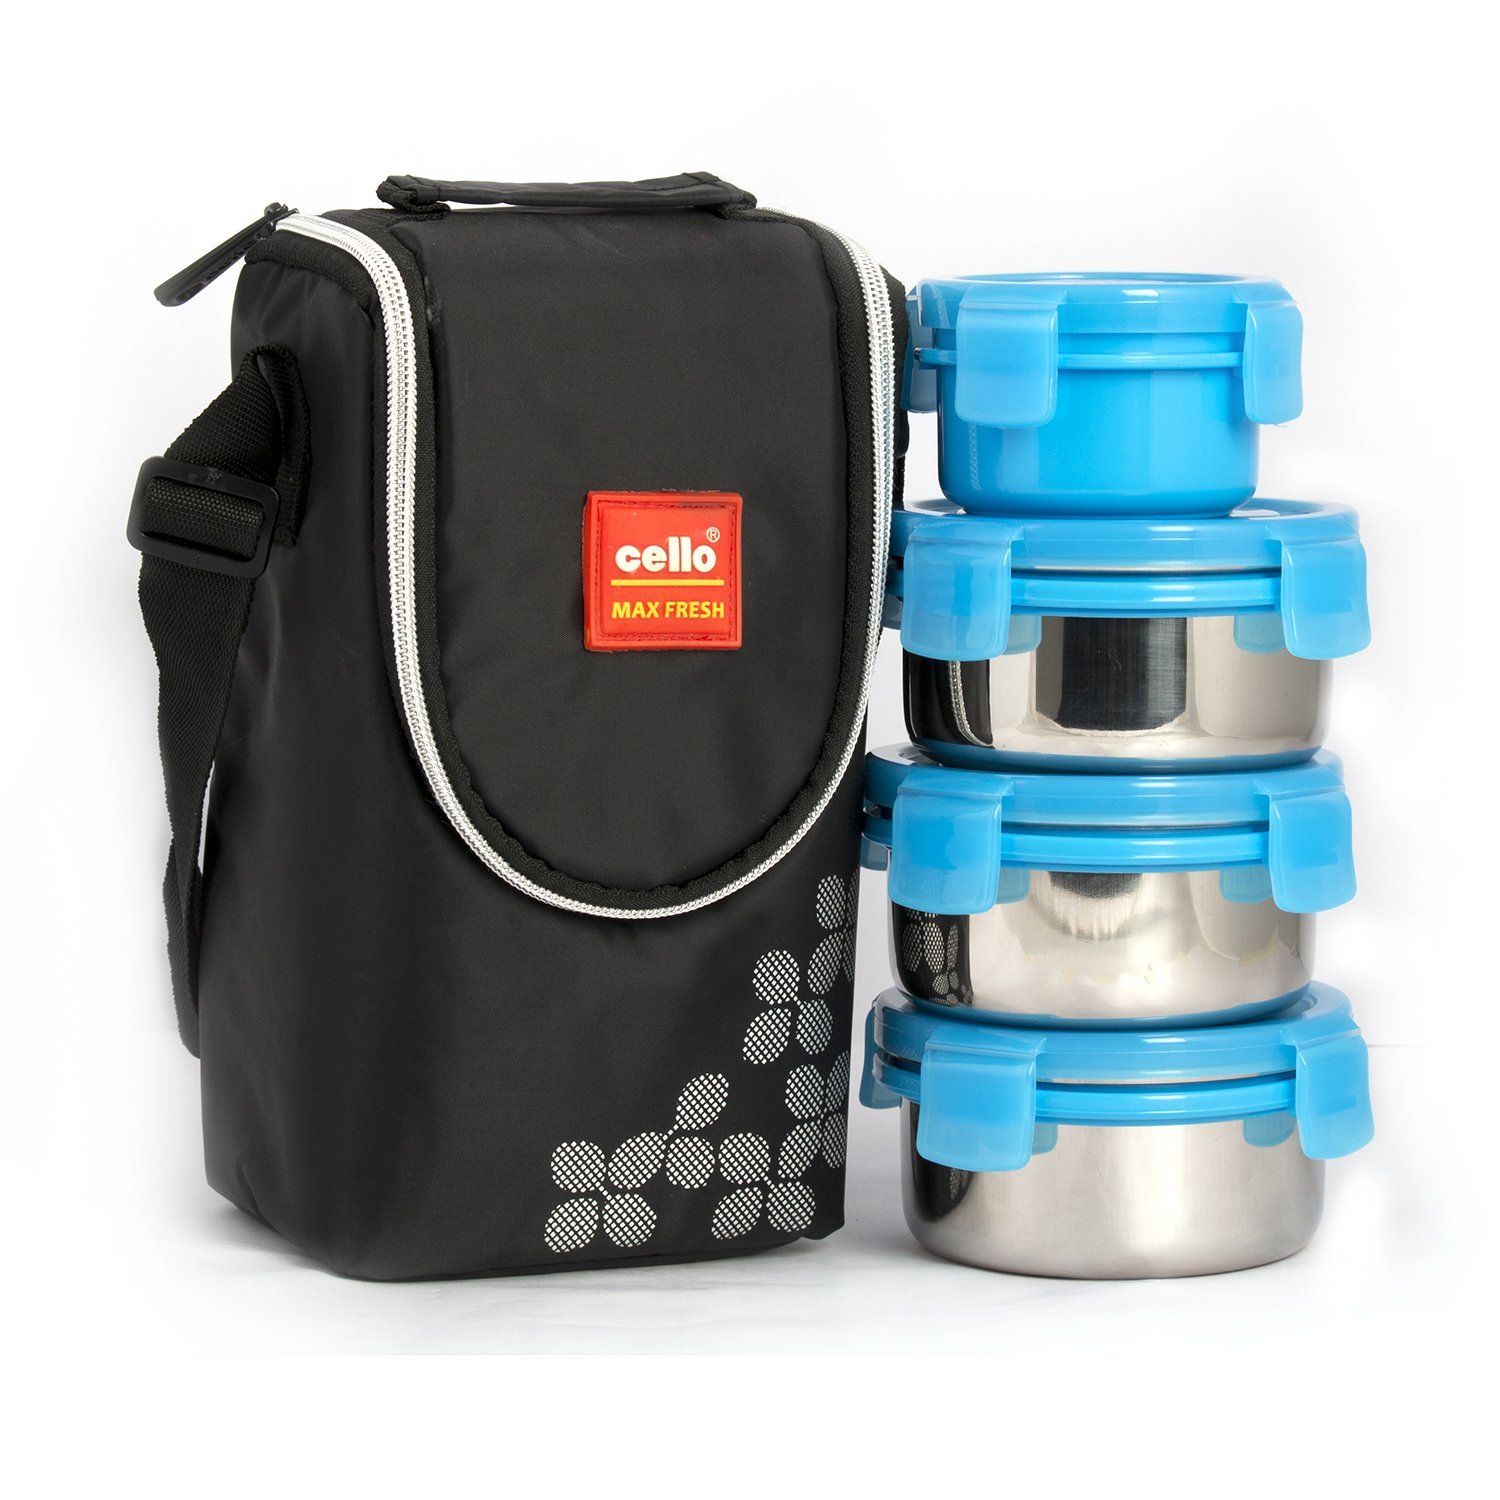 Amazon India – Get upto 40% off on Lunch Boxes